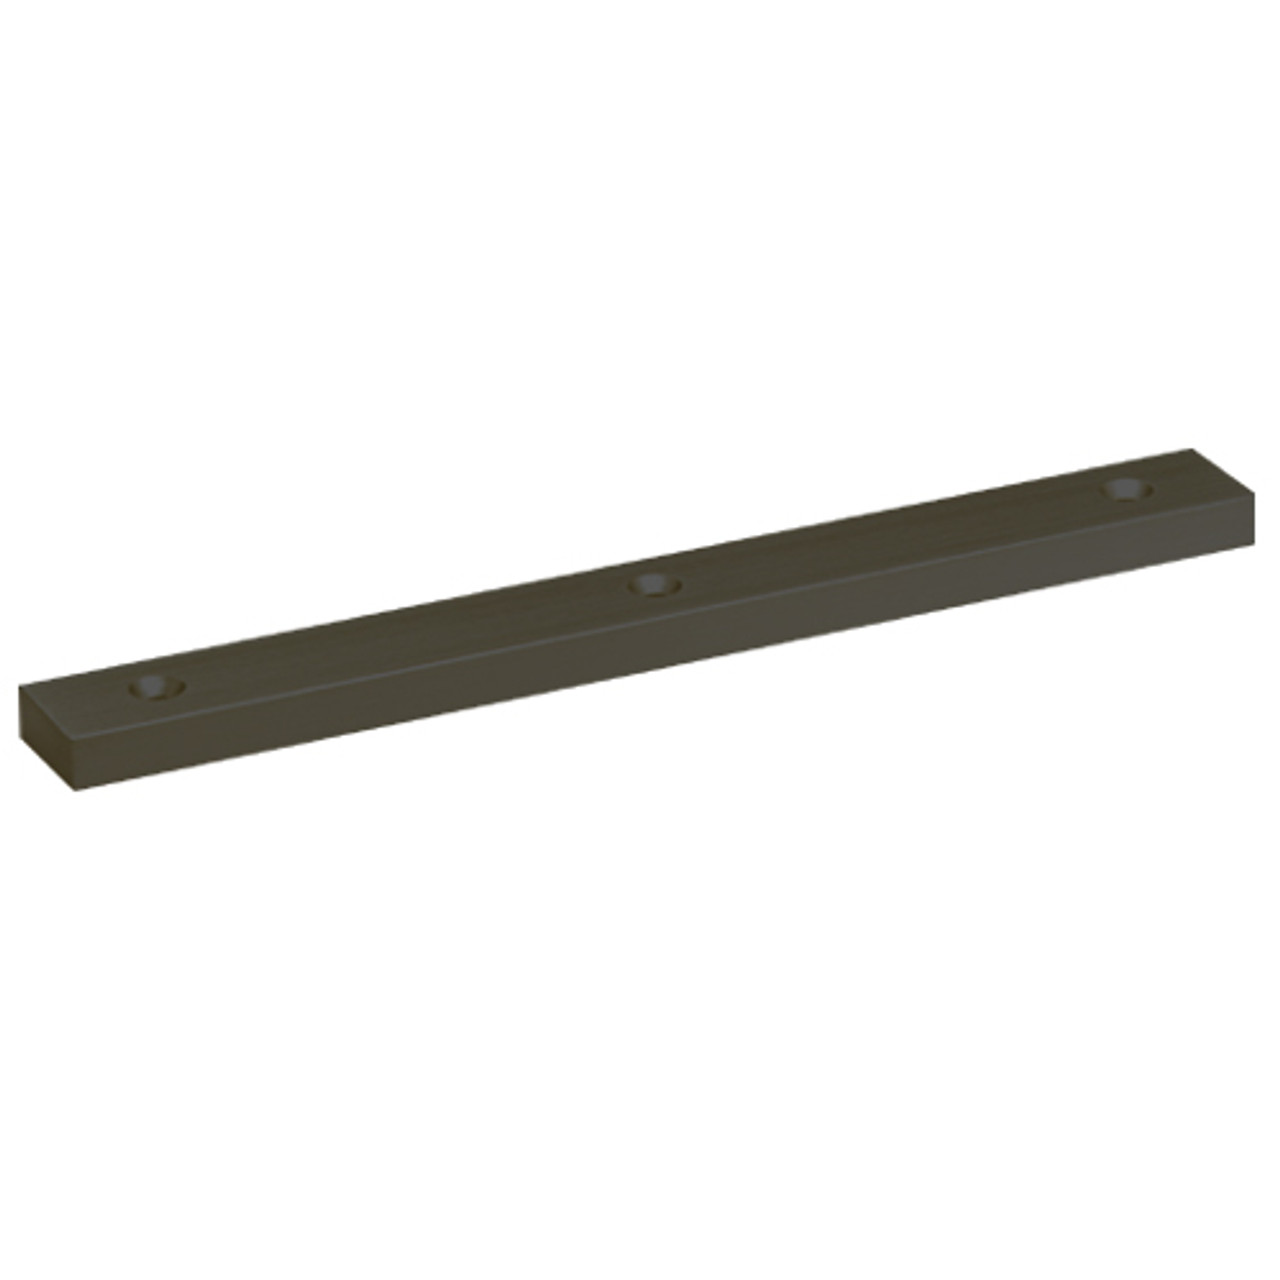 4122-US10B DynaLock 4000 Series Filler Plates for Double Maglocks in Oil Rubbed Bronze